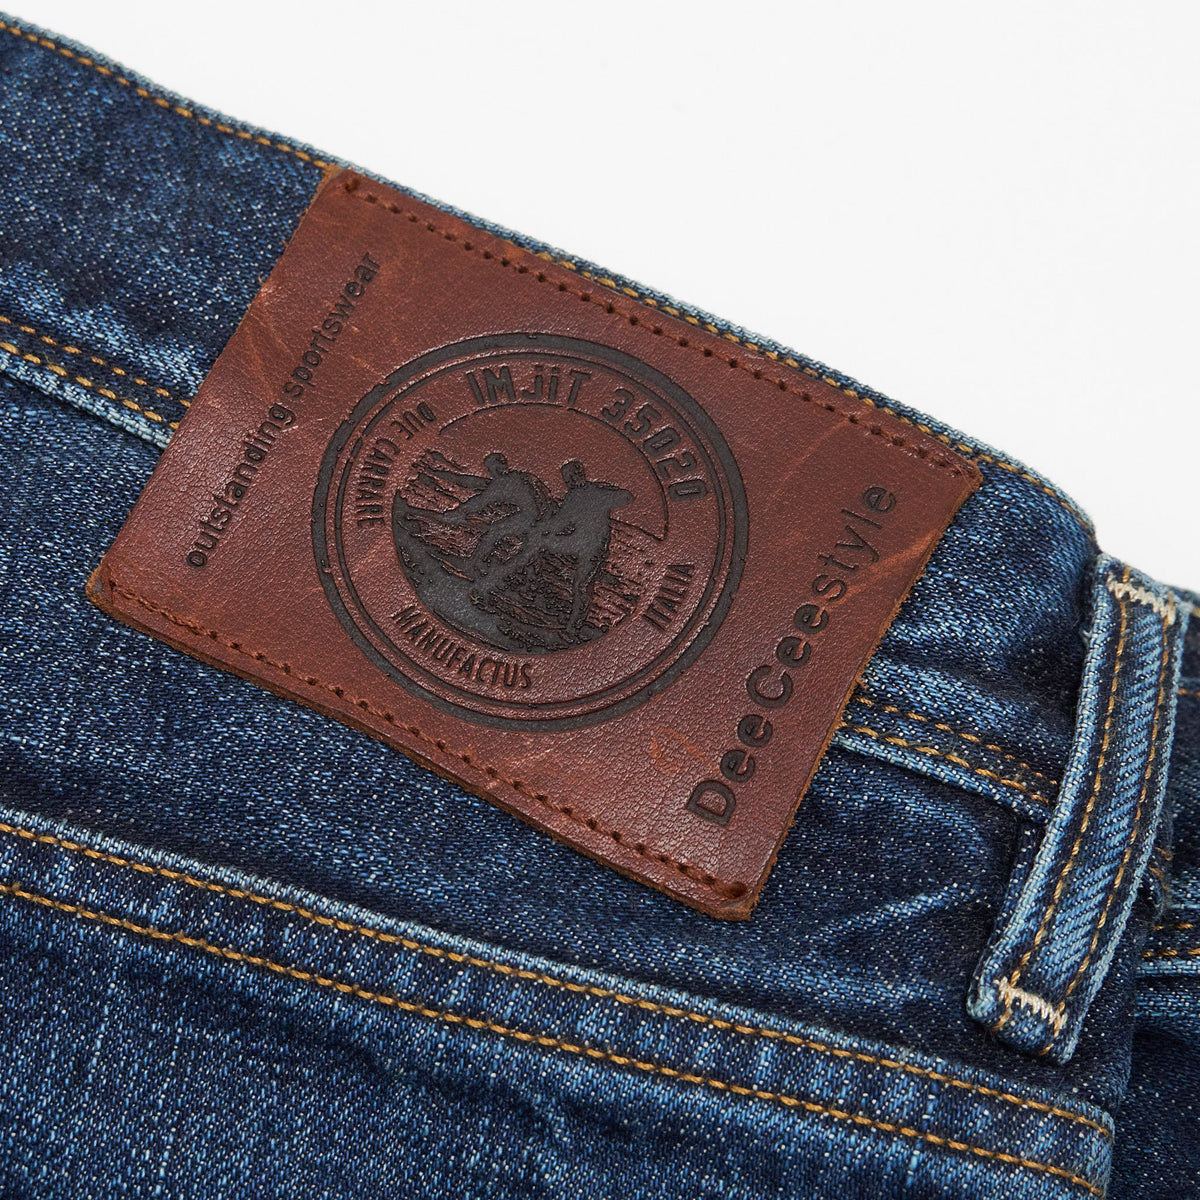 IMjiT x DeeCee style 15oz. Regular Tapered Selvage Denim Jeans Stone Washed